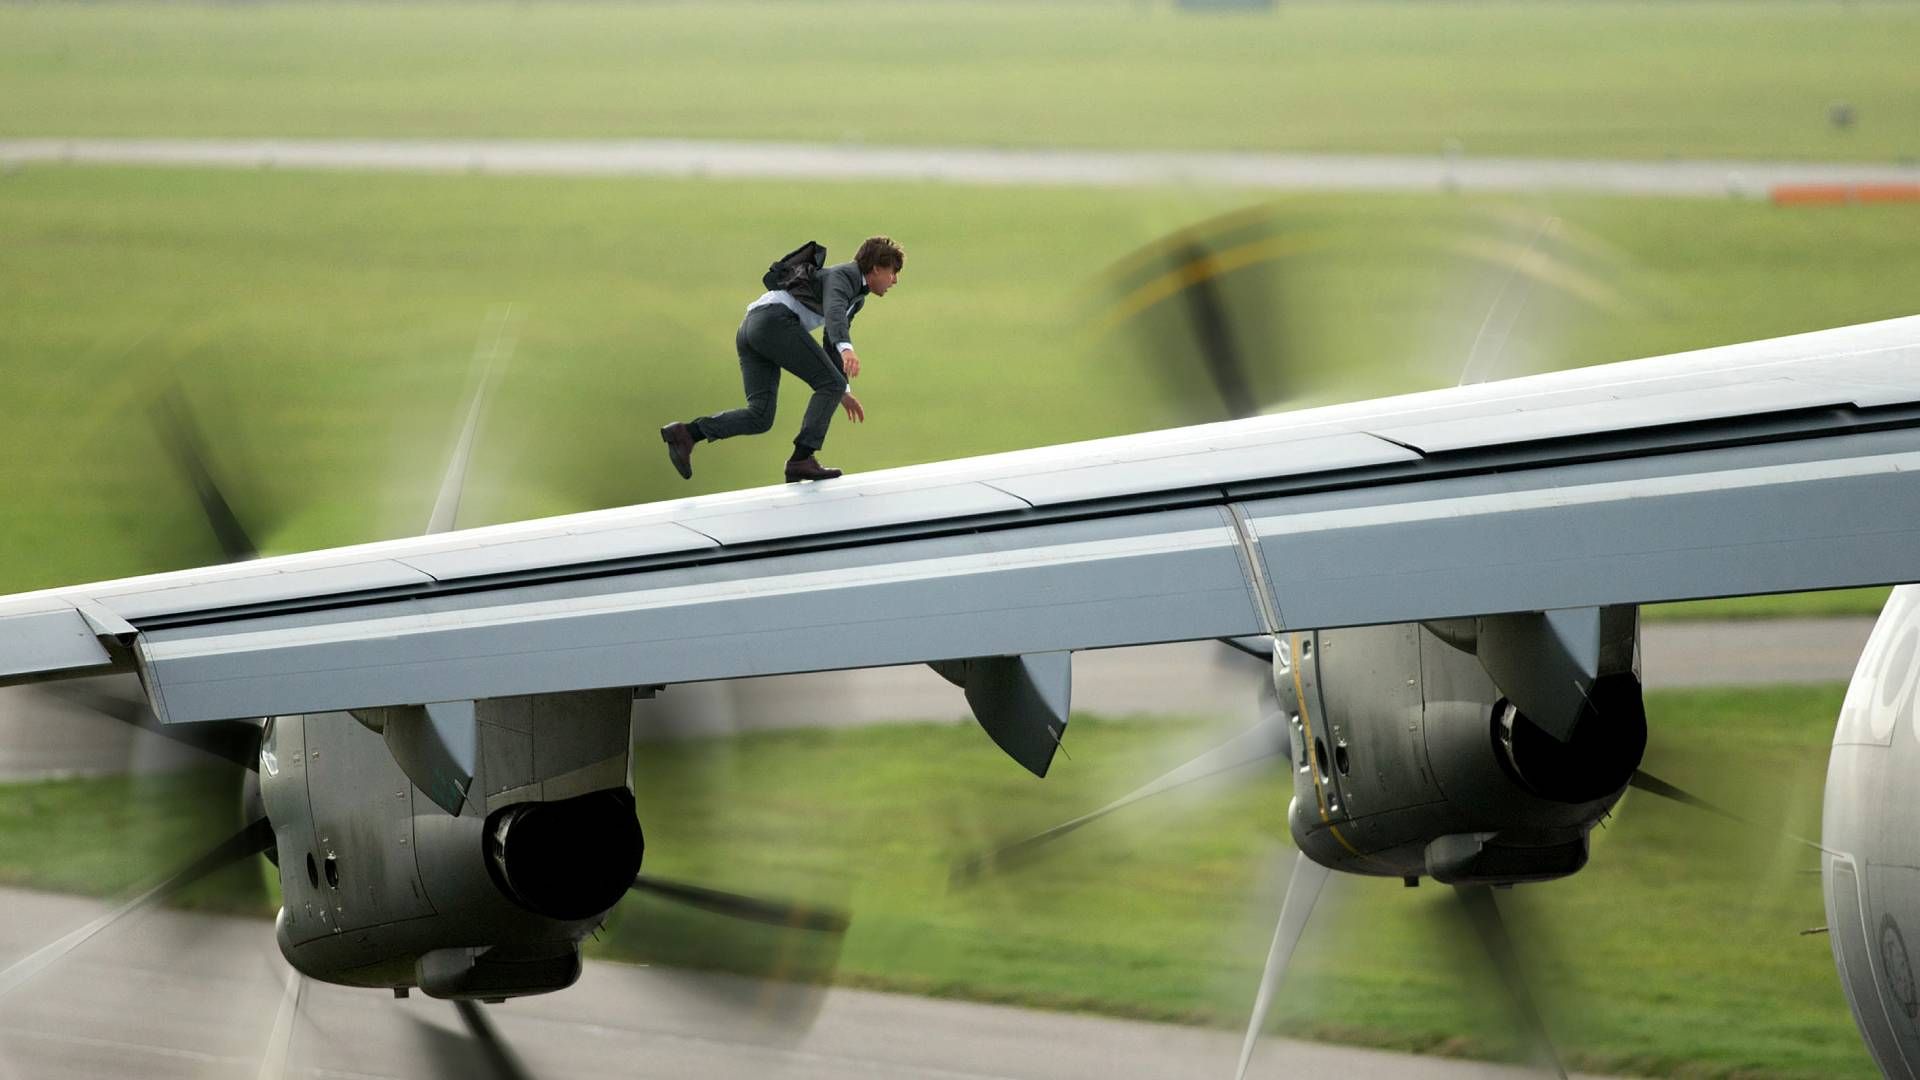 <p>                     Tom Cruise's stunts don’t get much bigger than his plane scene in Mission: Impossible – Rogue Nation. Playing IMF agent Ethan Hunt, the sequence sees him hanging onto the side of an Airbus A400M as it takes off, before flying to 1,000 feet at high speed. And yes, of course, Cruise actually did the stunt himself with just a wire attached to the side of the plane and special contacts to protect his eyes. Another amazing fact about this moment too is that Cruise didn’t just perform the stunt once, he did it eight times.                   </p>